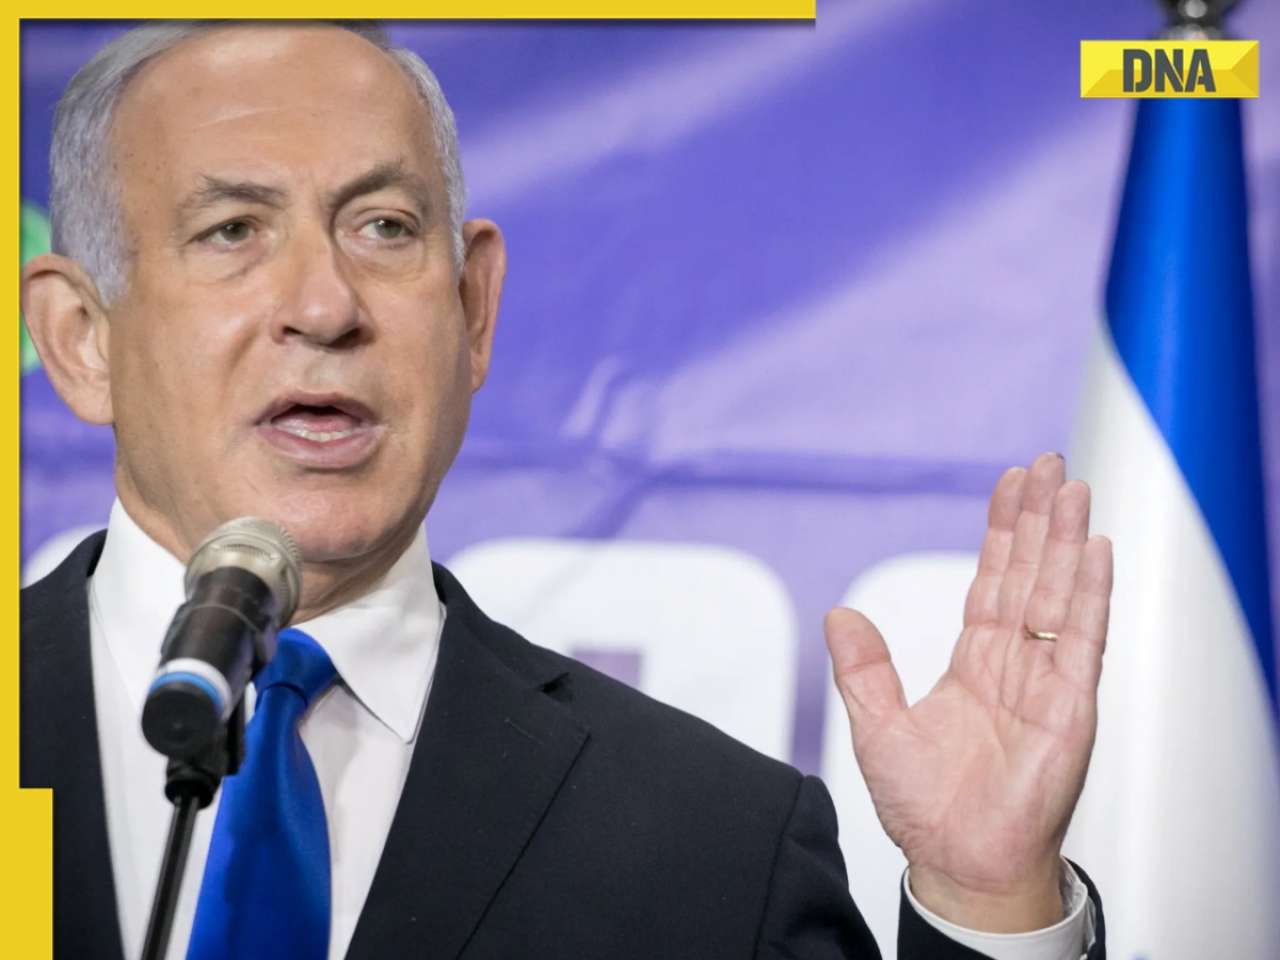 PM Netanyahu announces Israel will determine response to threats from Iran as allies urge for restraint